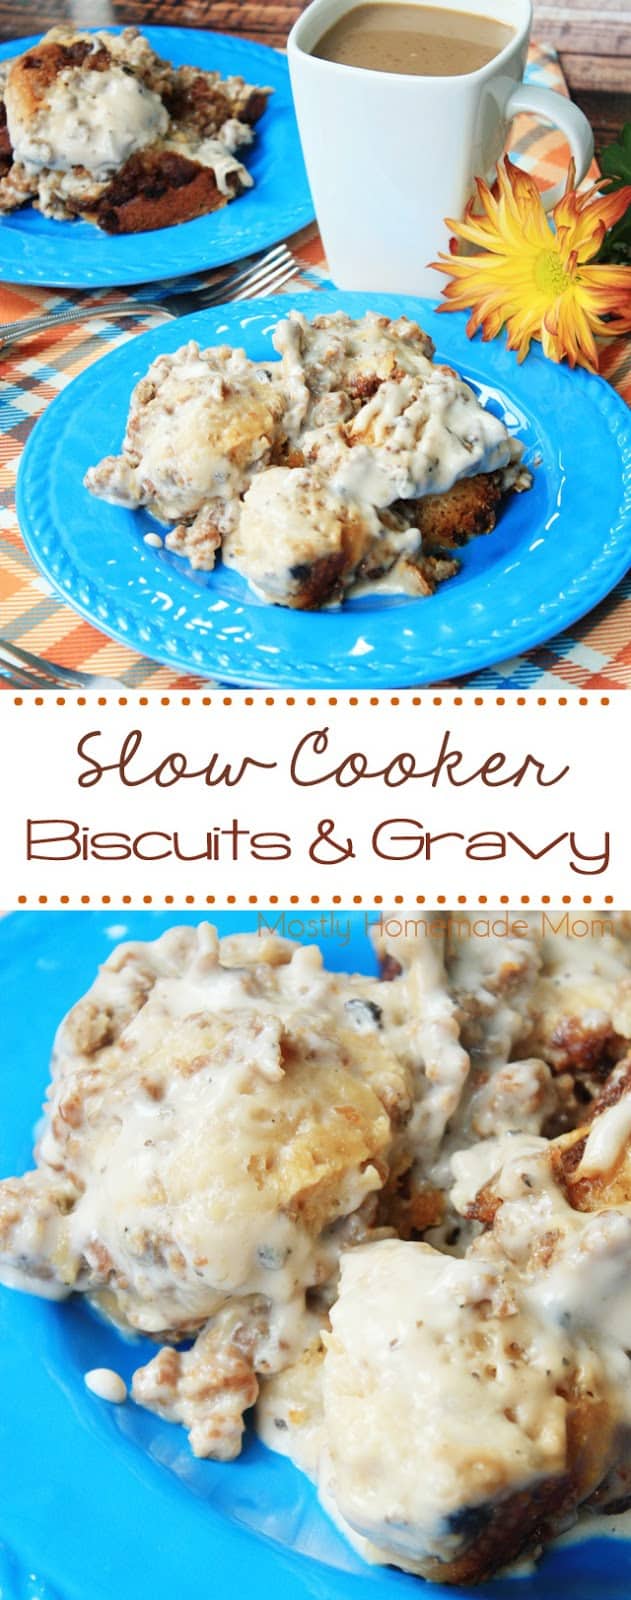 Slow Cooker Biscuits and Gravy - Mostly Homemade Mom